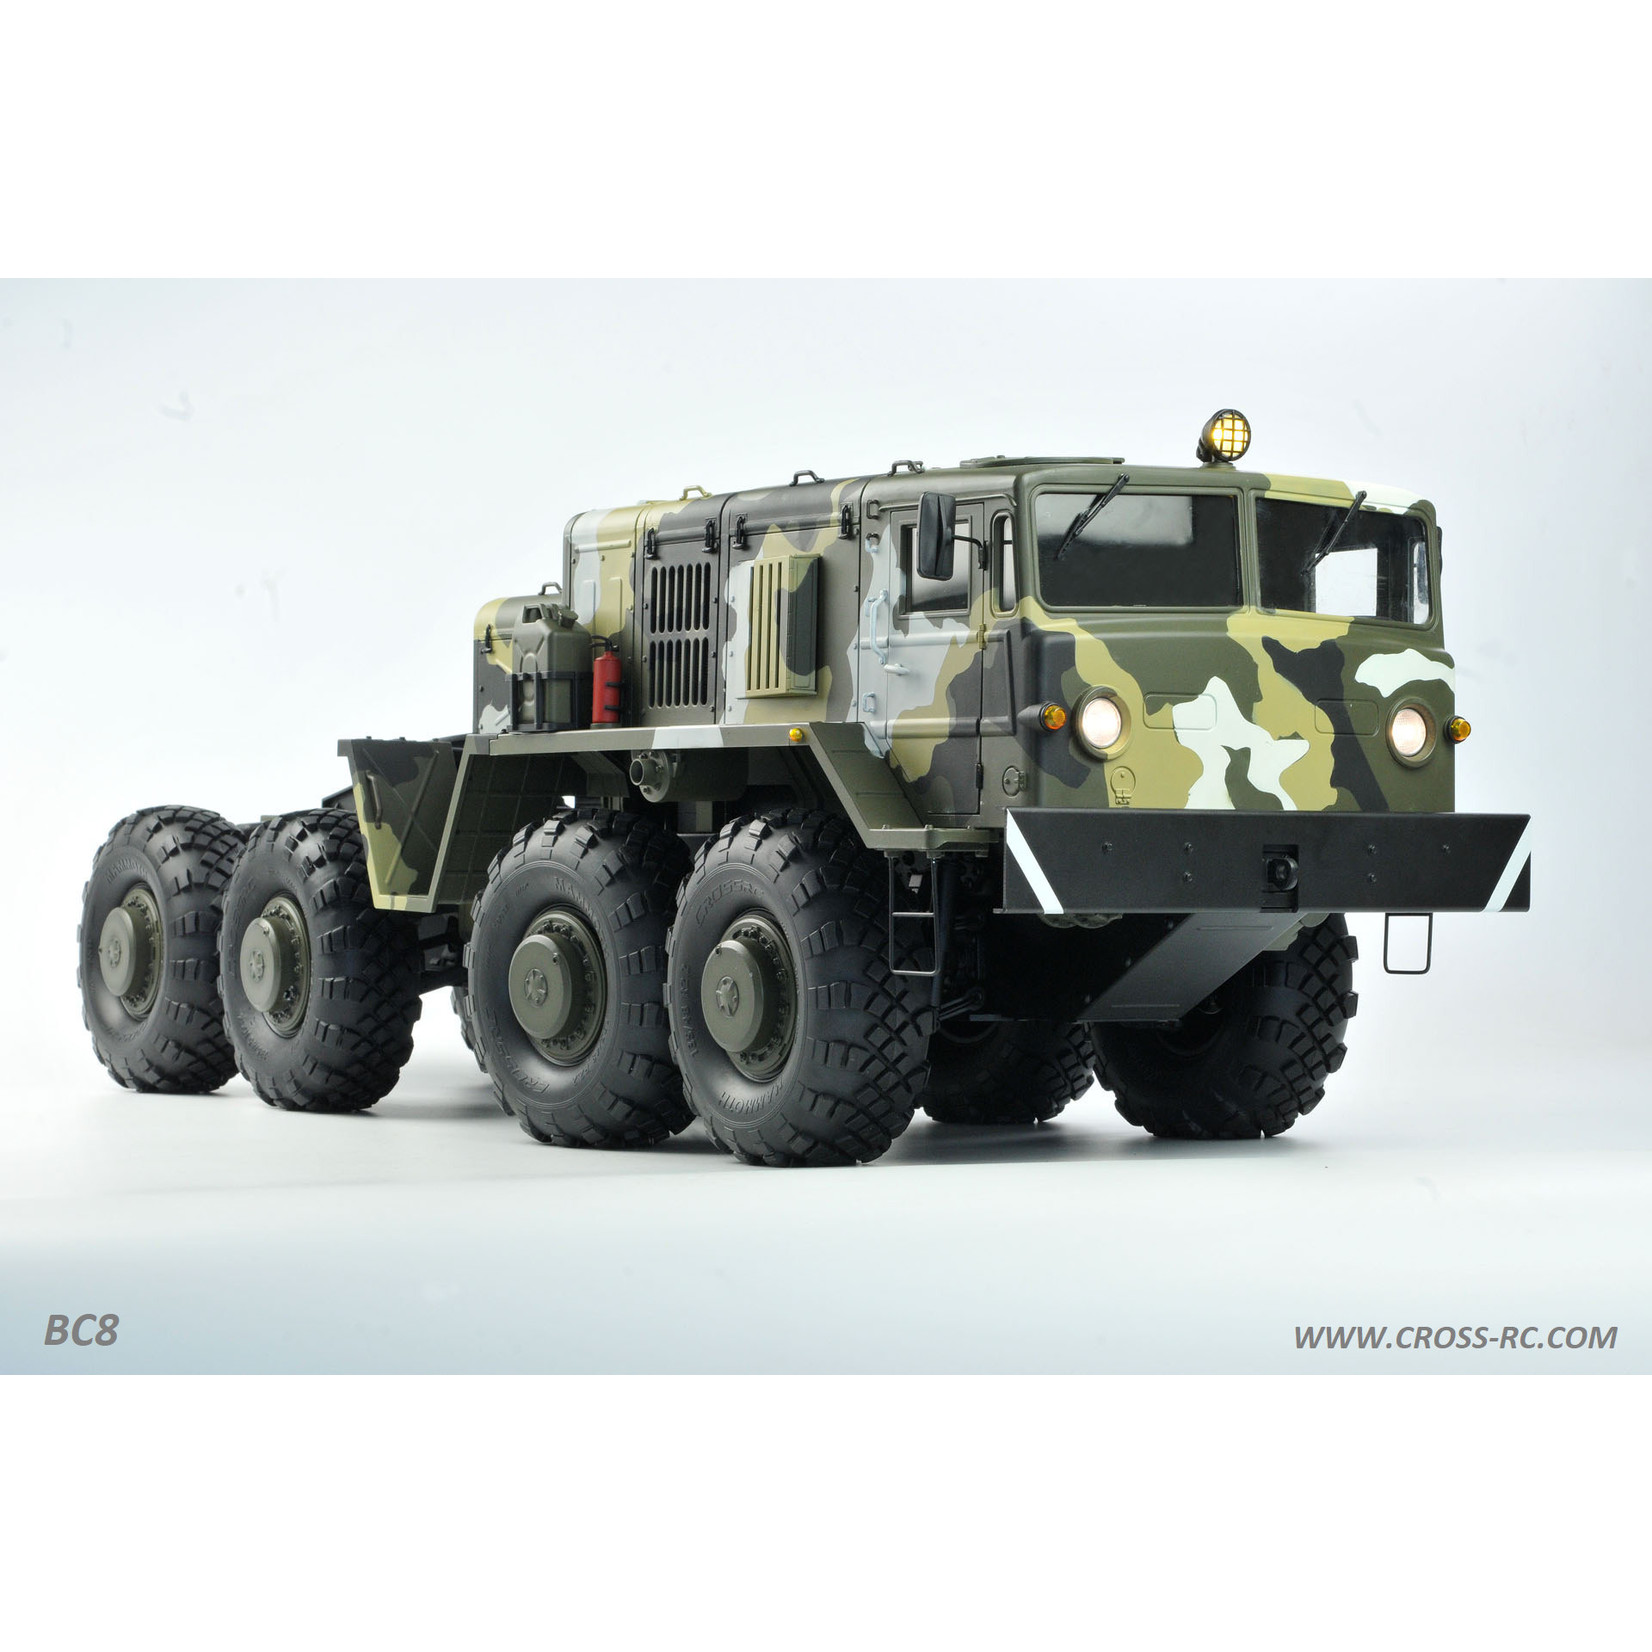 Cross RC BC8 Mammoth 1/12 8 x 8 Scale Off Road Military Truck Kit